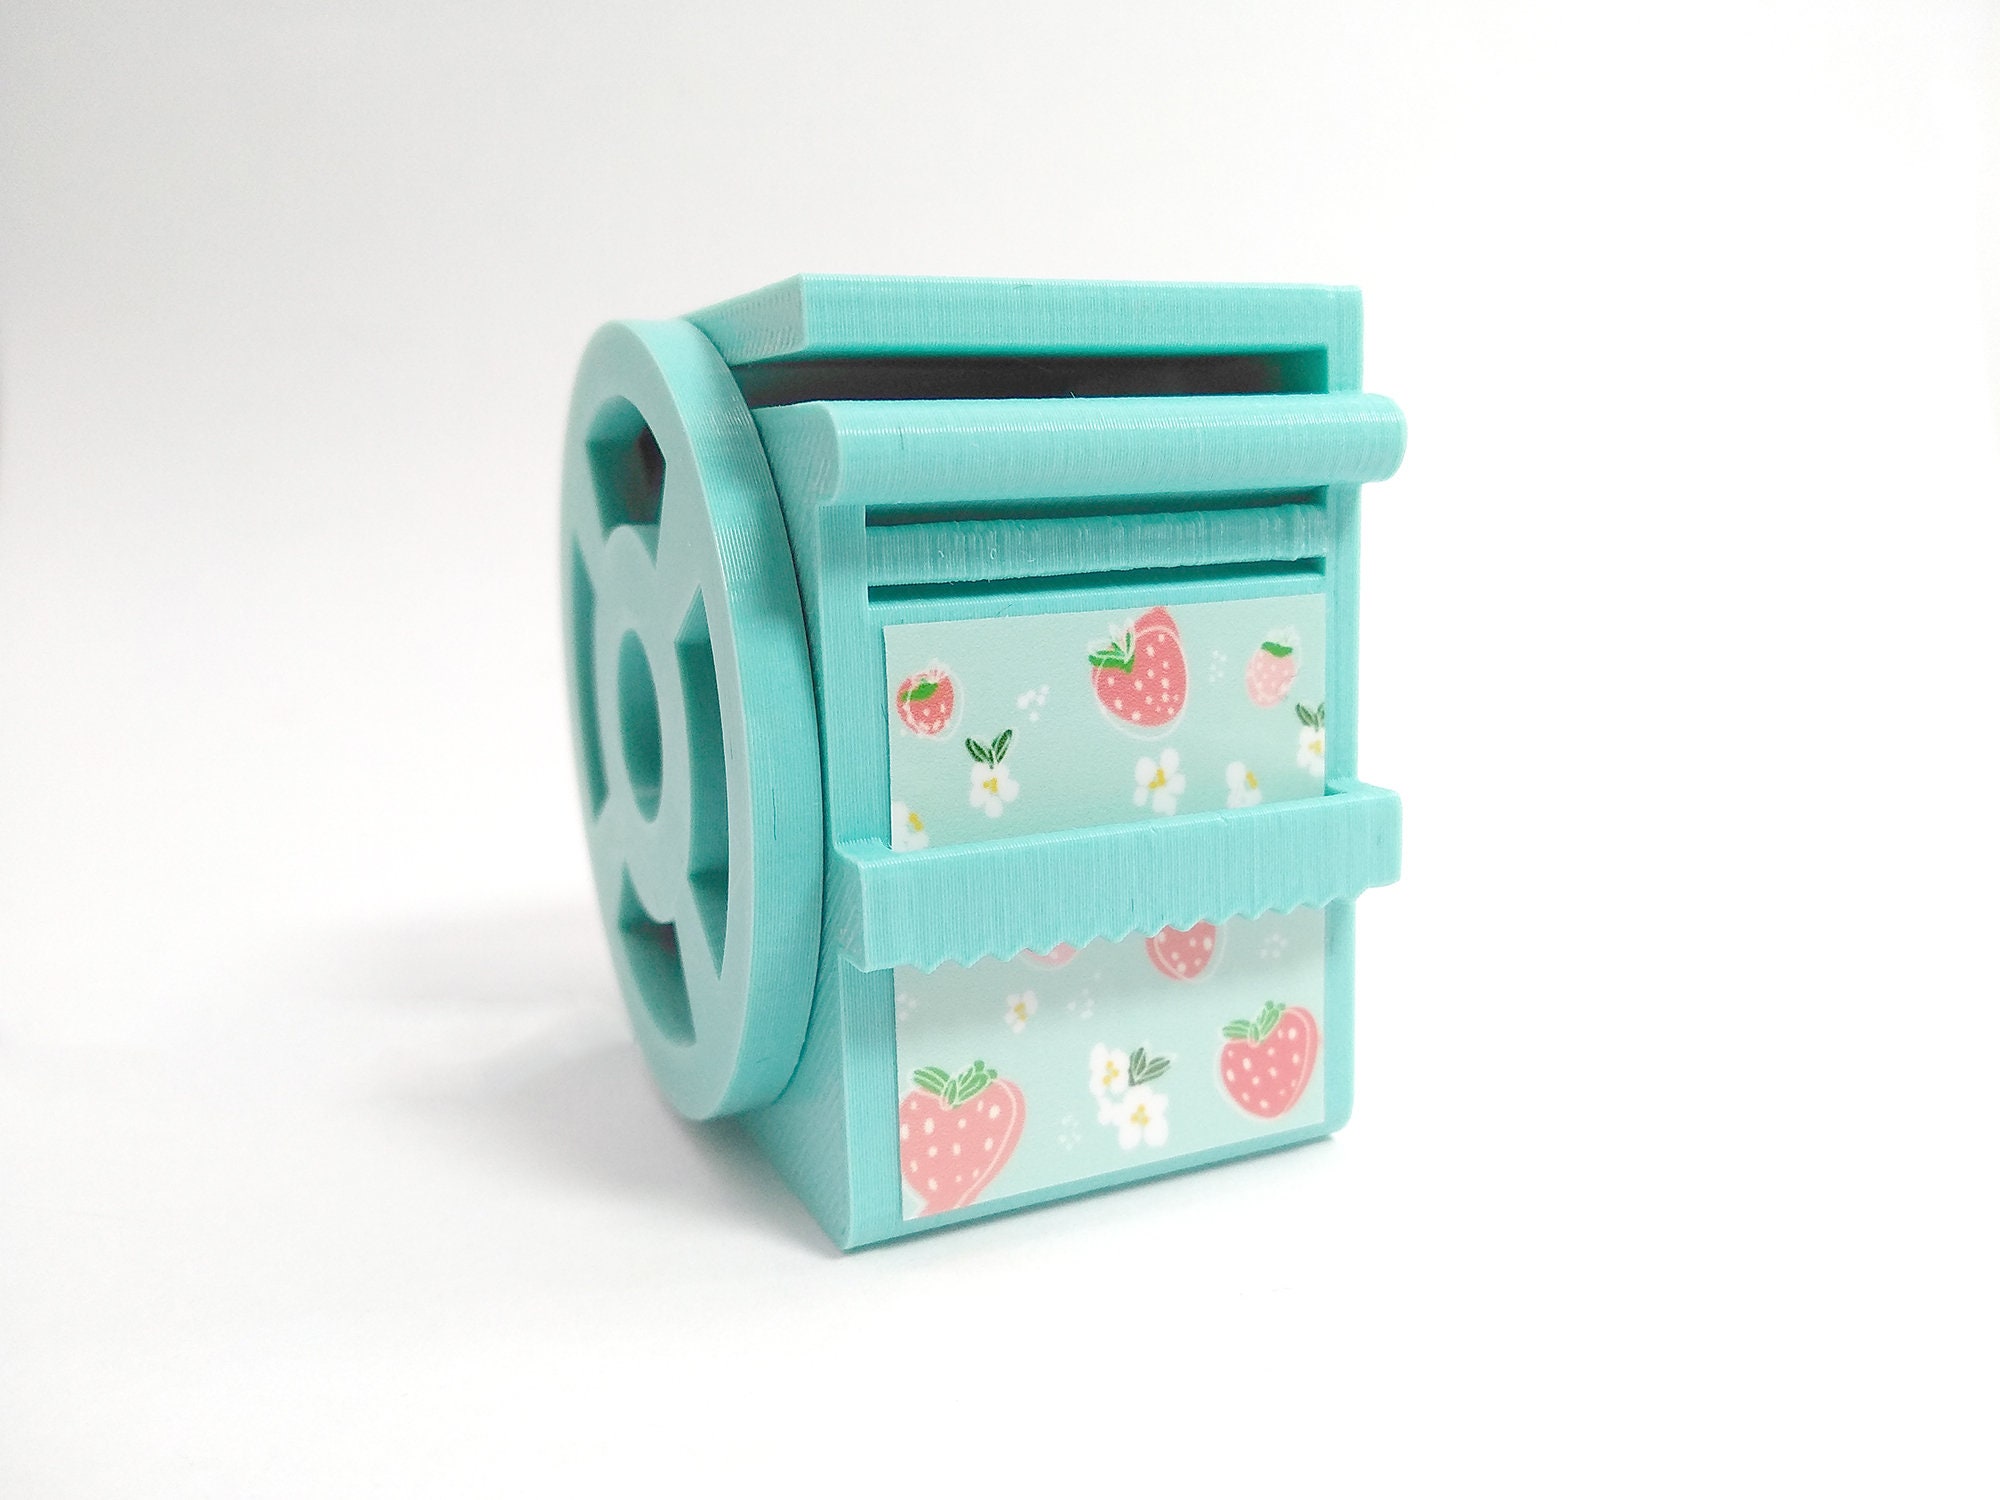 ZAMBT Stamp Roll Holder Dispenser for a Roll of 100 Stamps